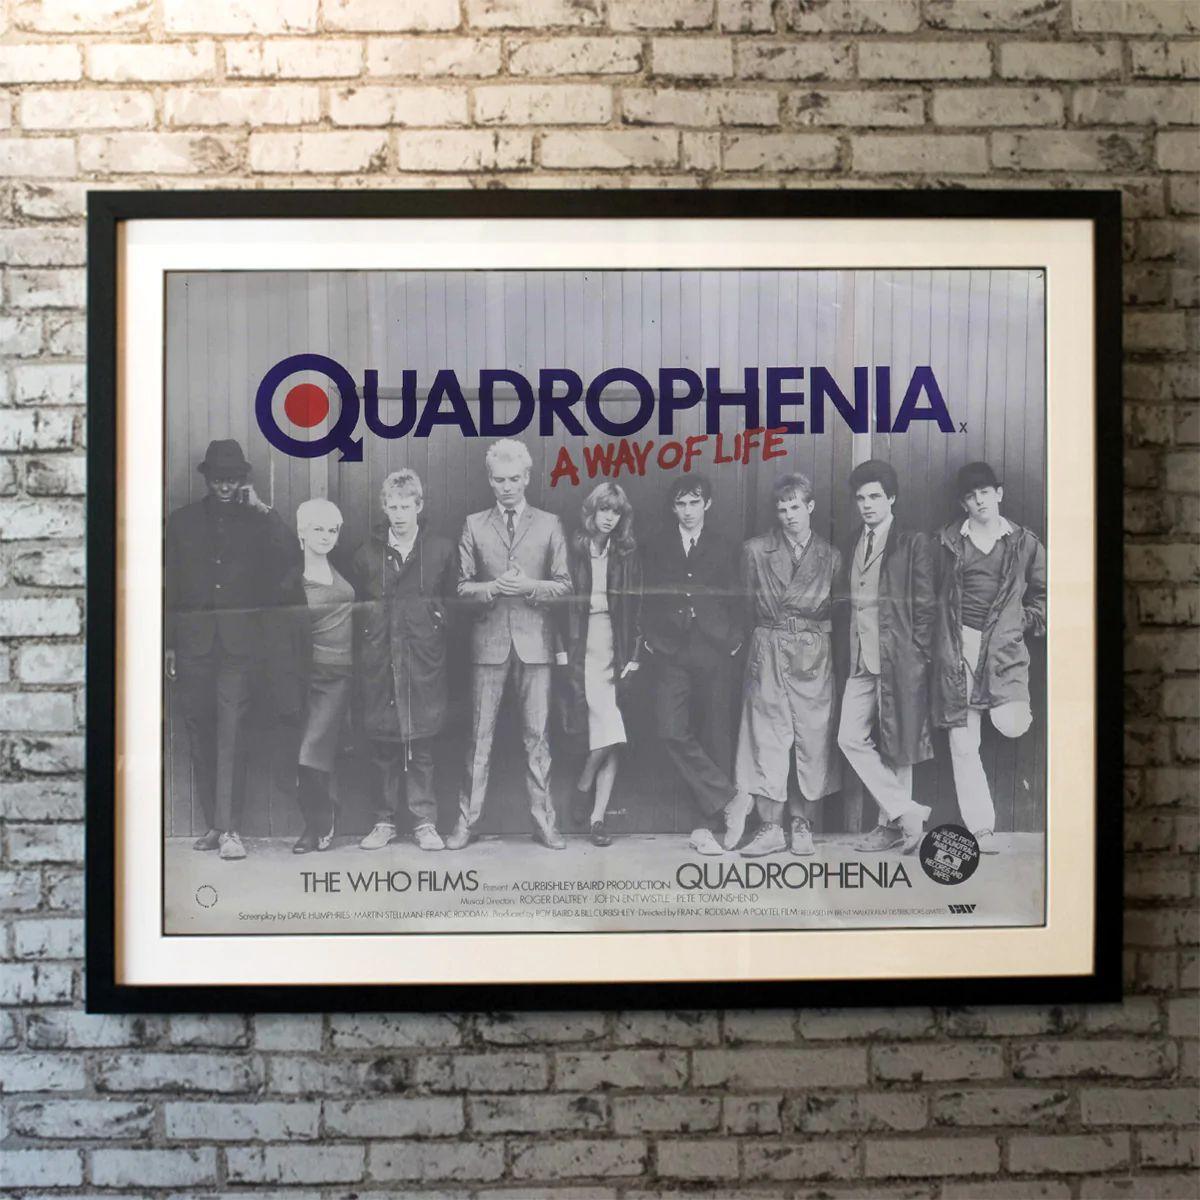 Quadrophenia, Unframed Poster, 1979

Original British Quad (30 X 40 Inches). Jimmy loathes his job and parents. He seeks solace with his mod clique, scooter riding, and drugs, only to be disappointed.

Year: 1979
Nationality: United